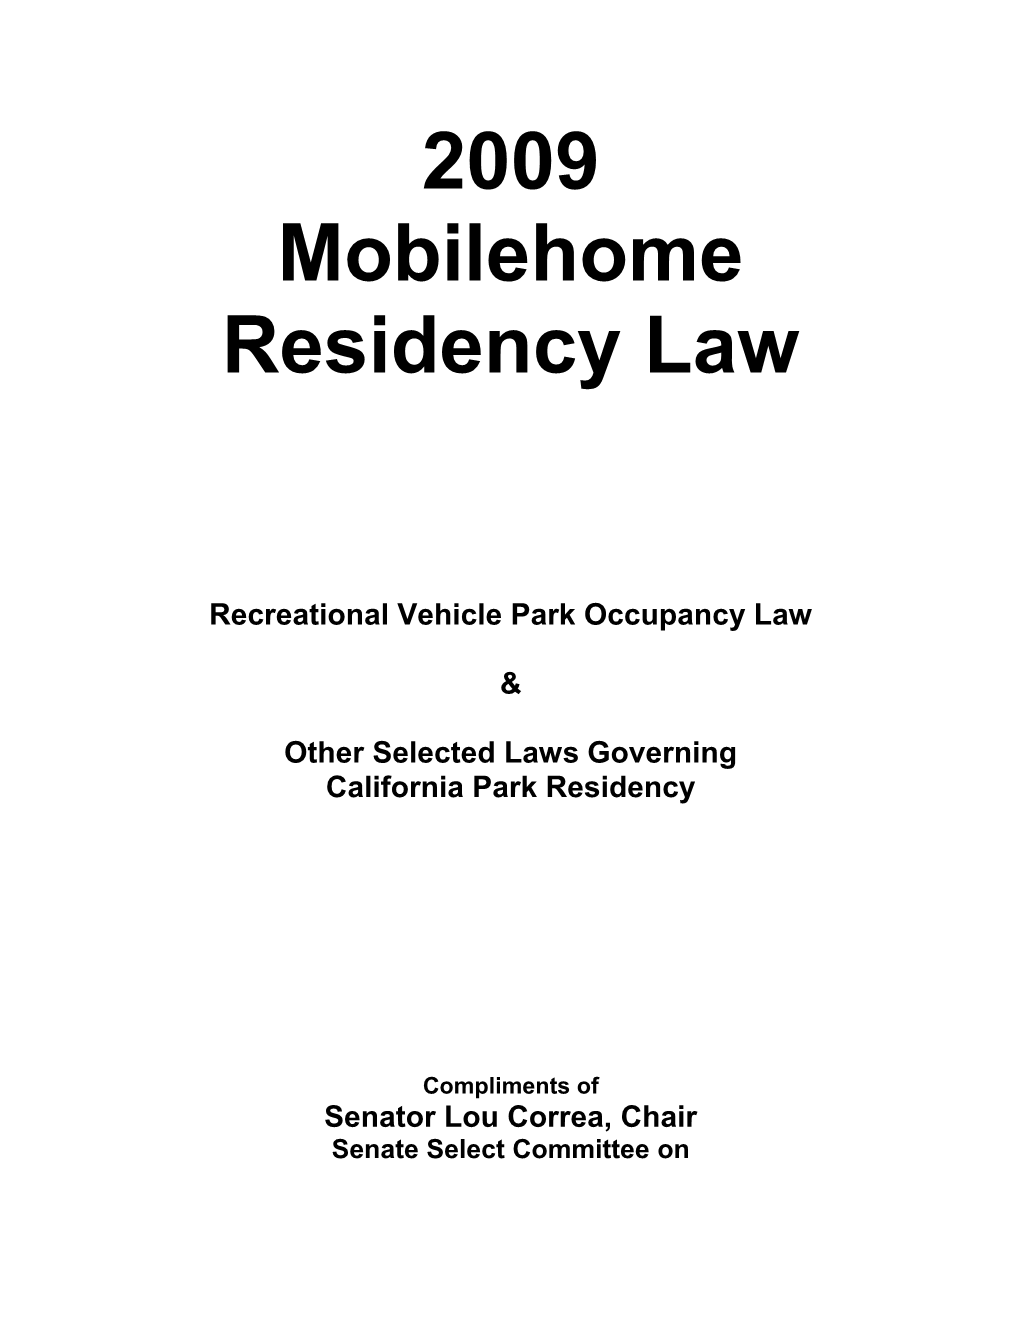 2003 Mobilehome Residency Law